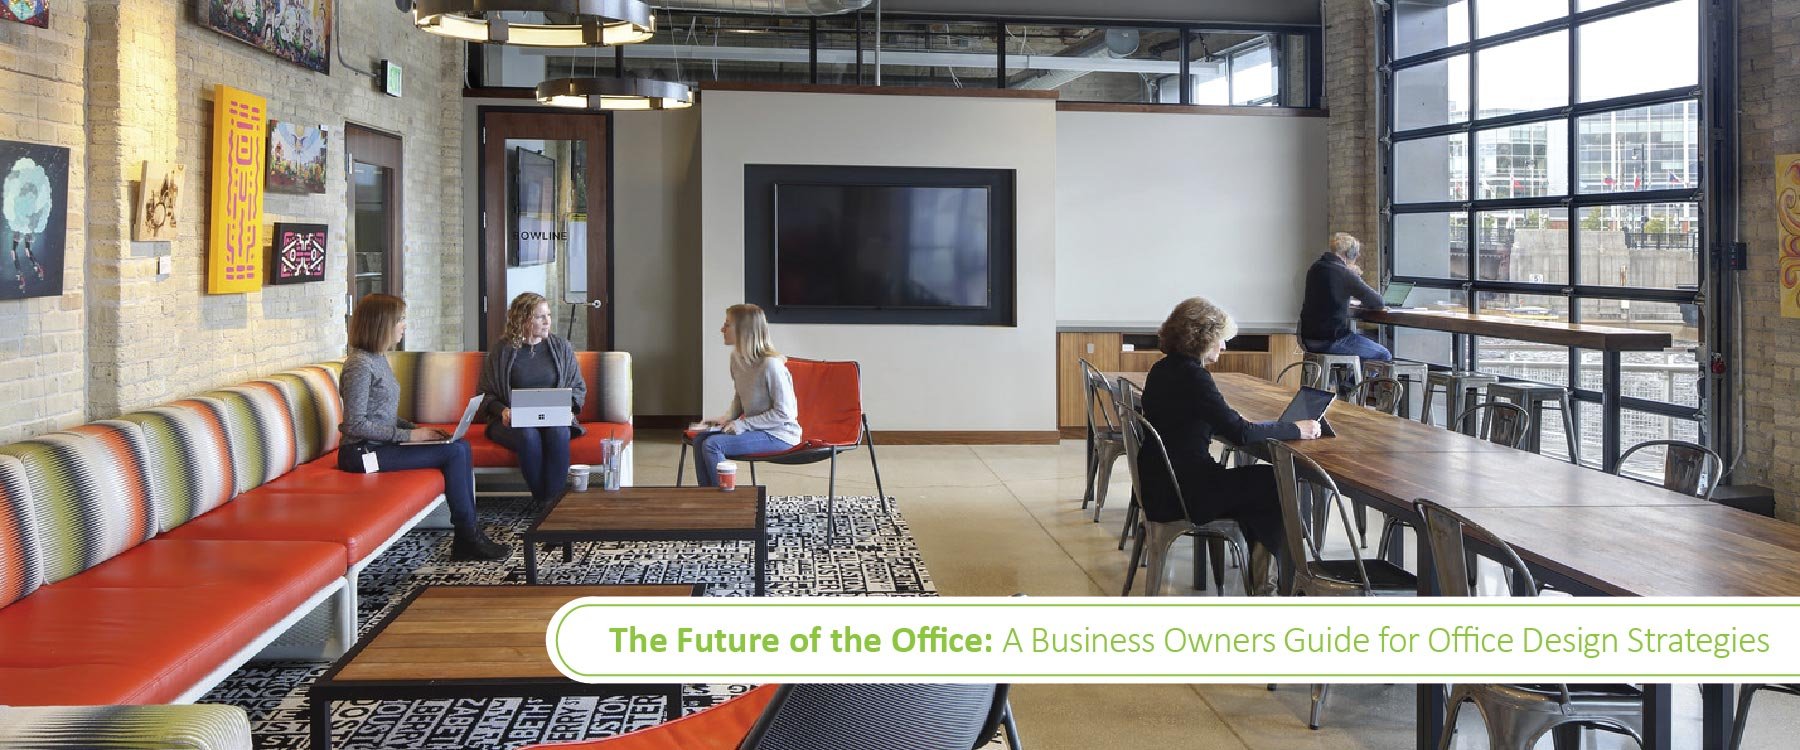 The Future of Work: Business Owners Guide for Office Design Strategies